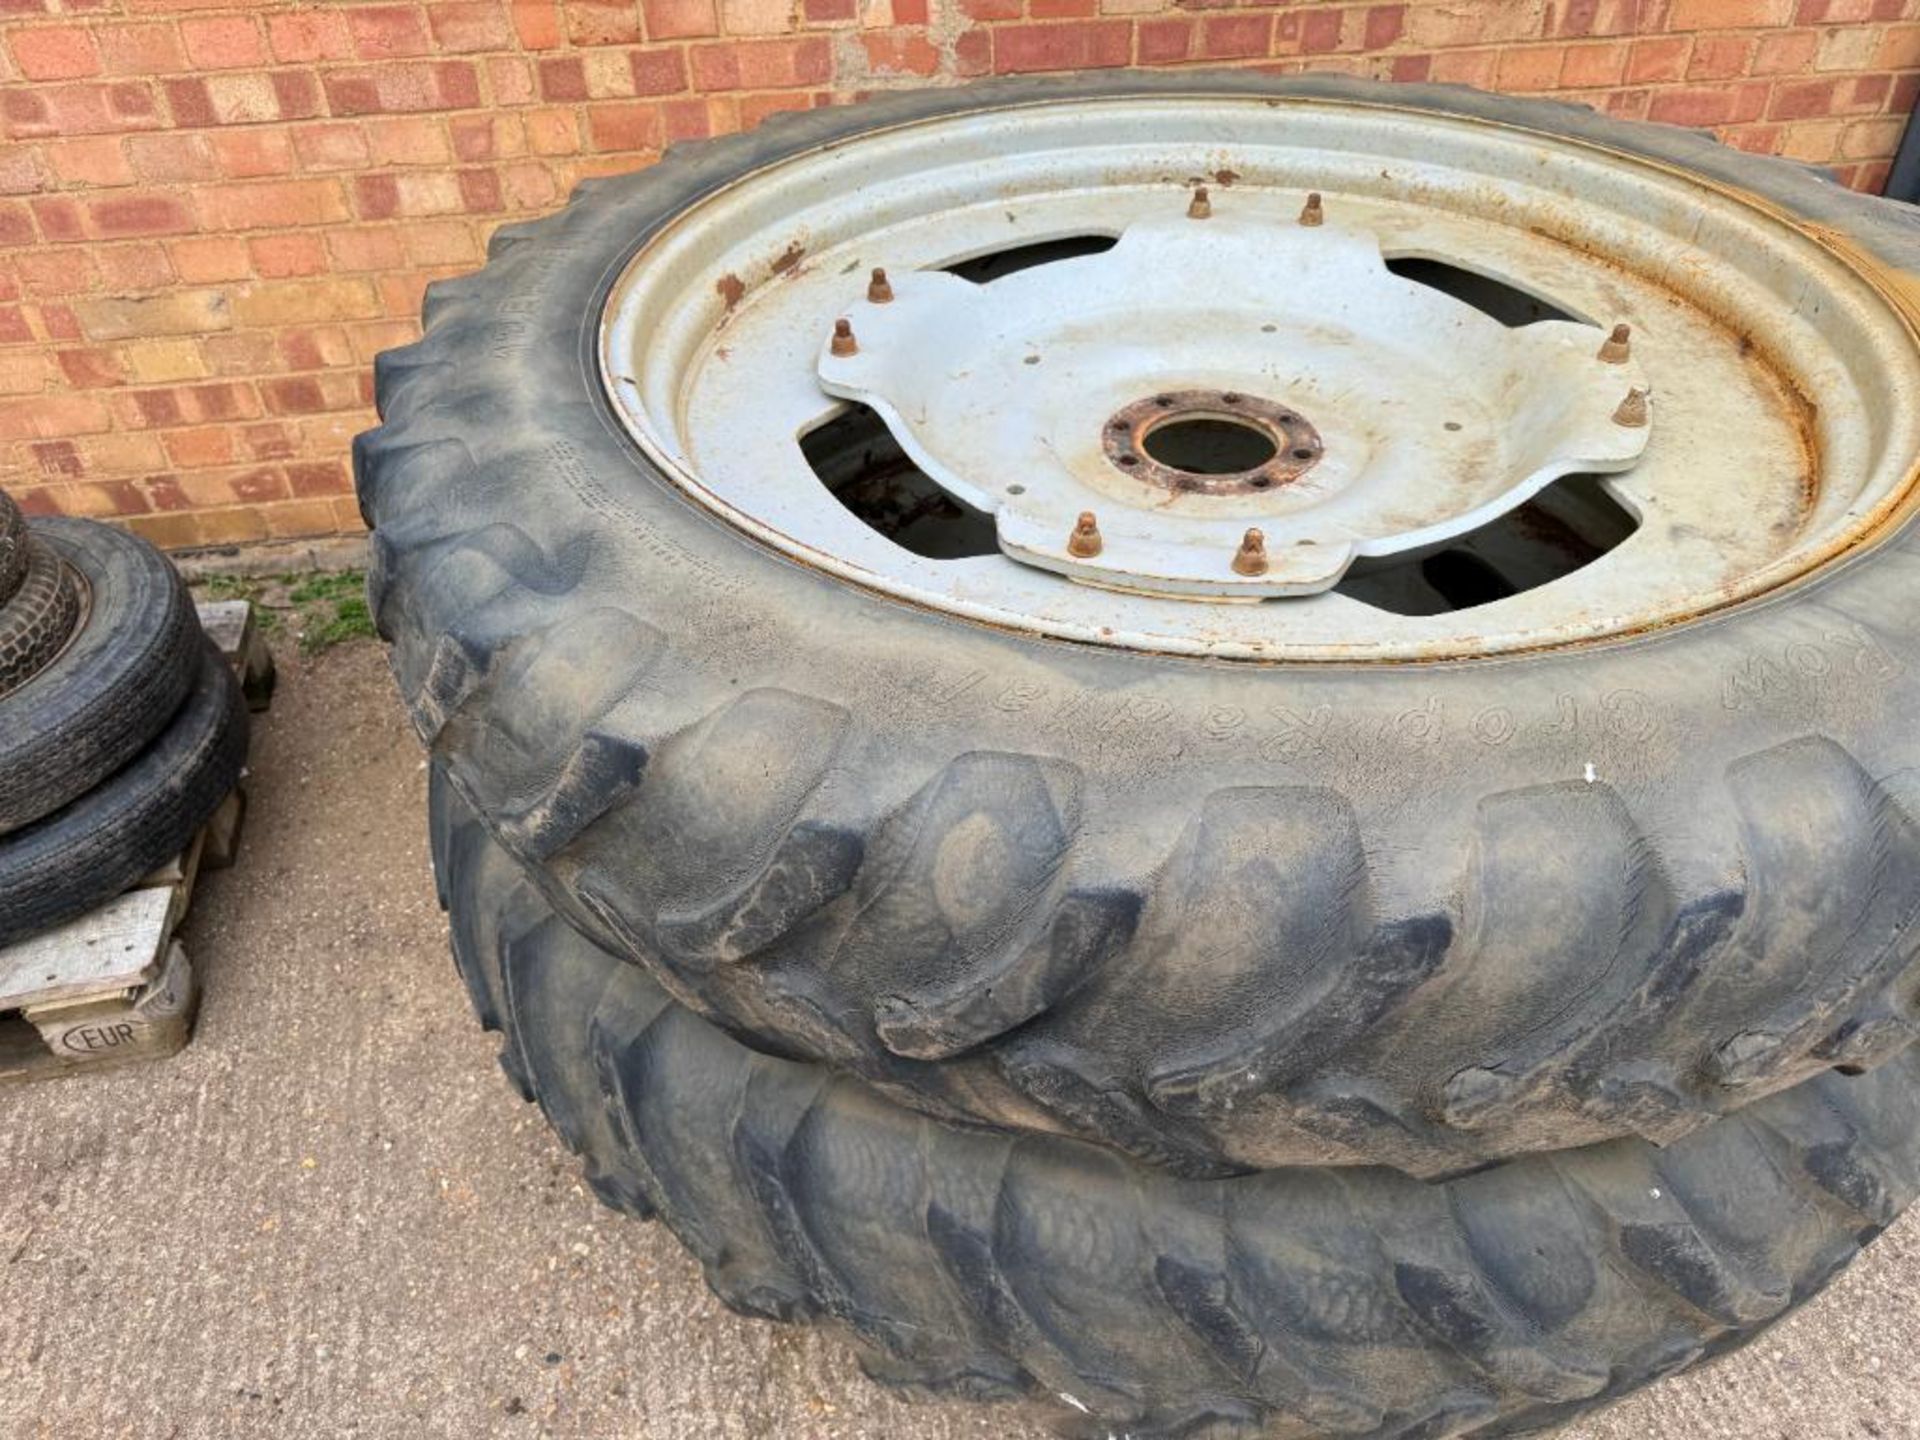 Set Alliance 13.6R48 rear and BKT 11.2R36 front row crop wheels and tyres on Massey Ferguson centres - Image 3 of 8